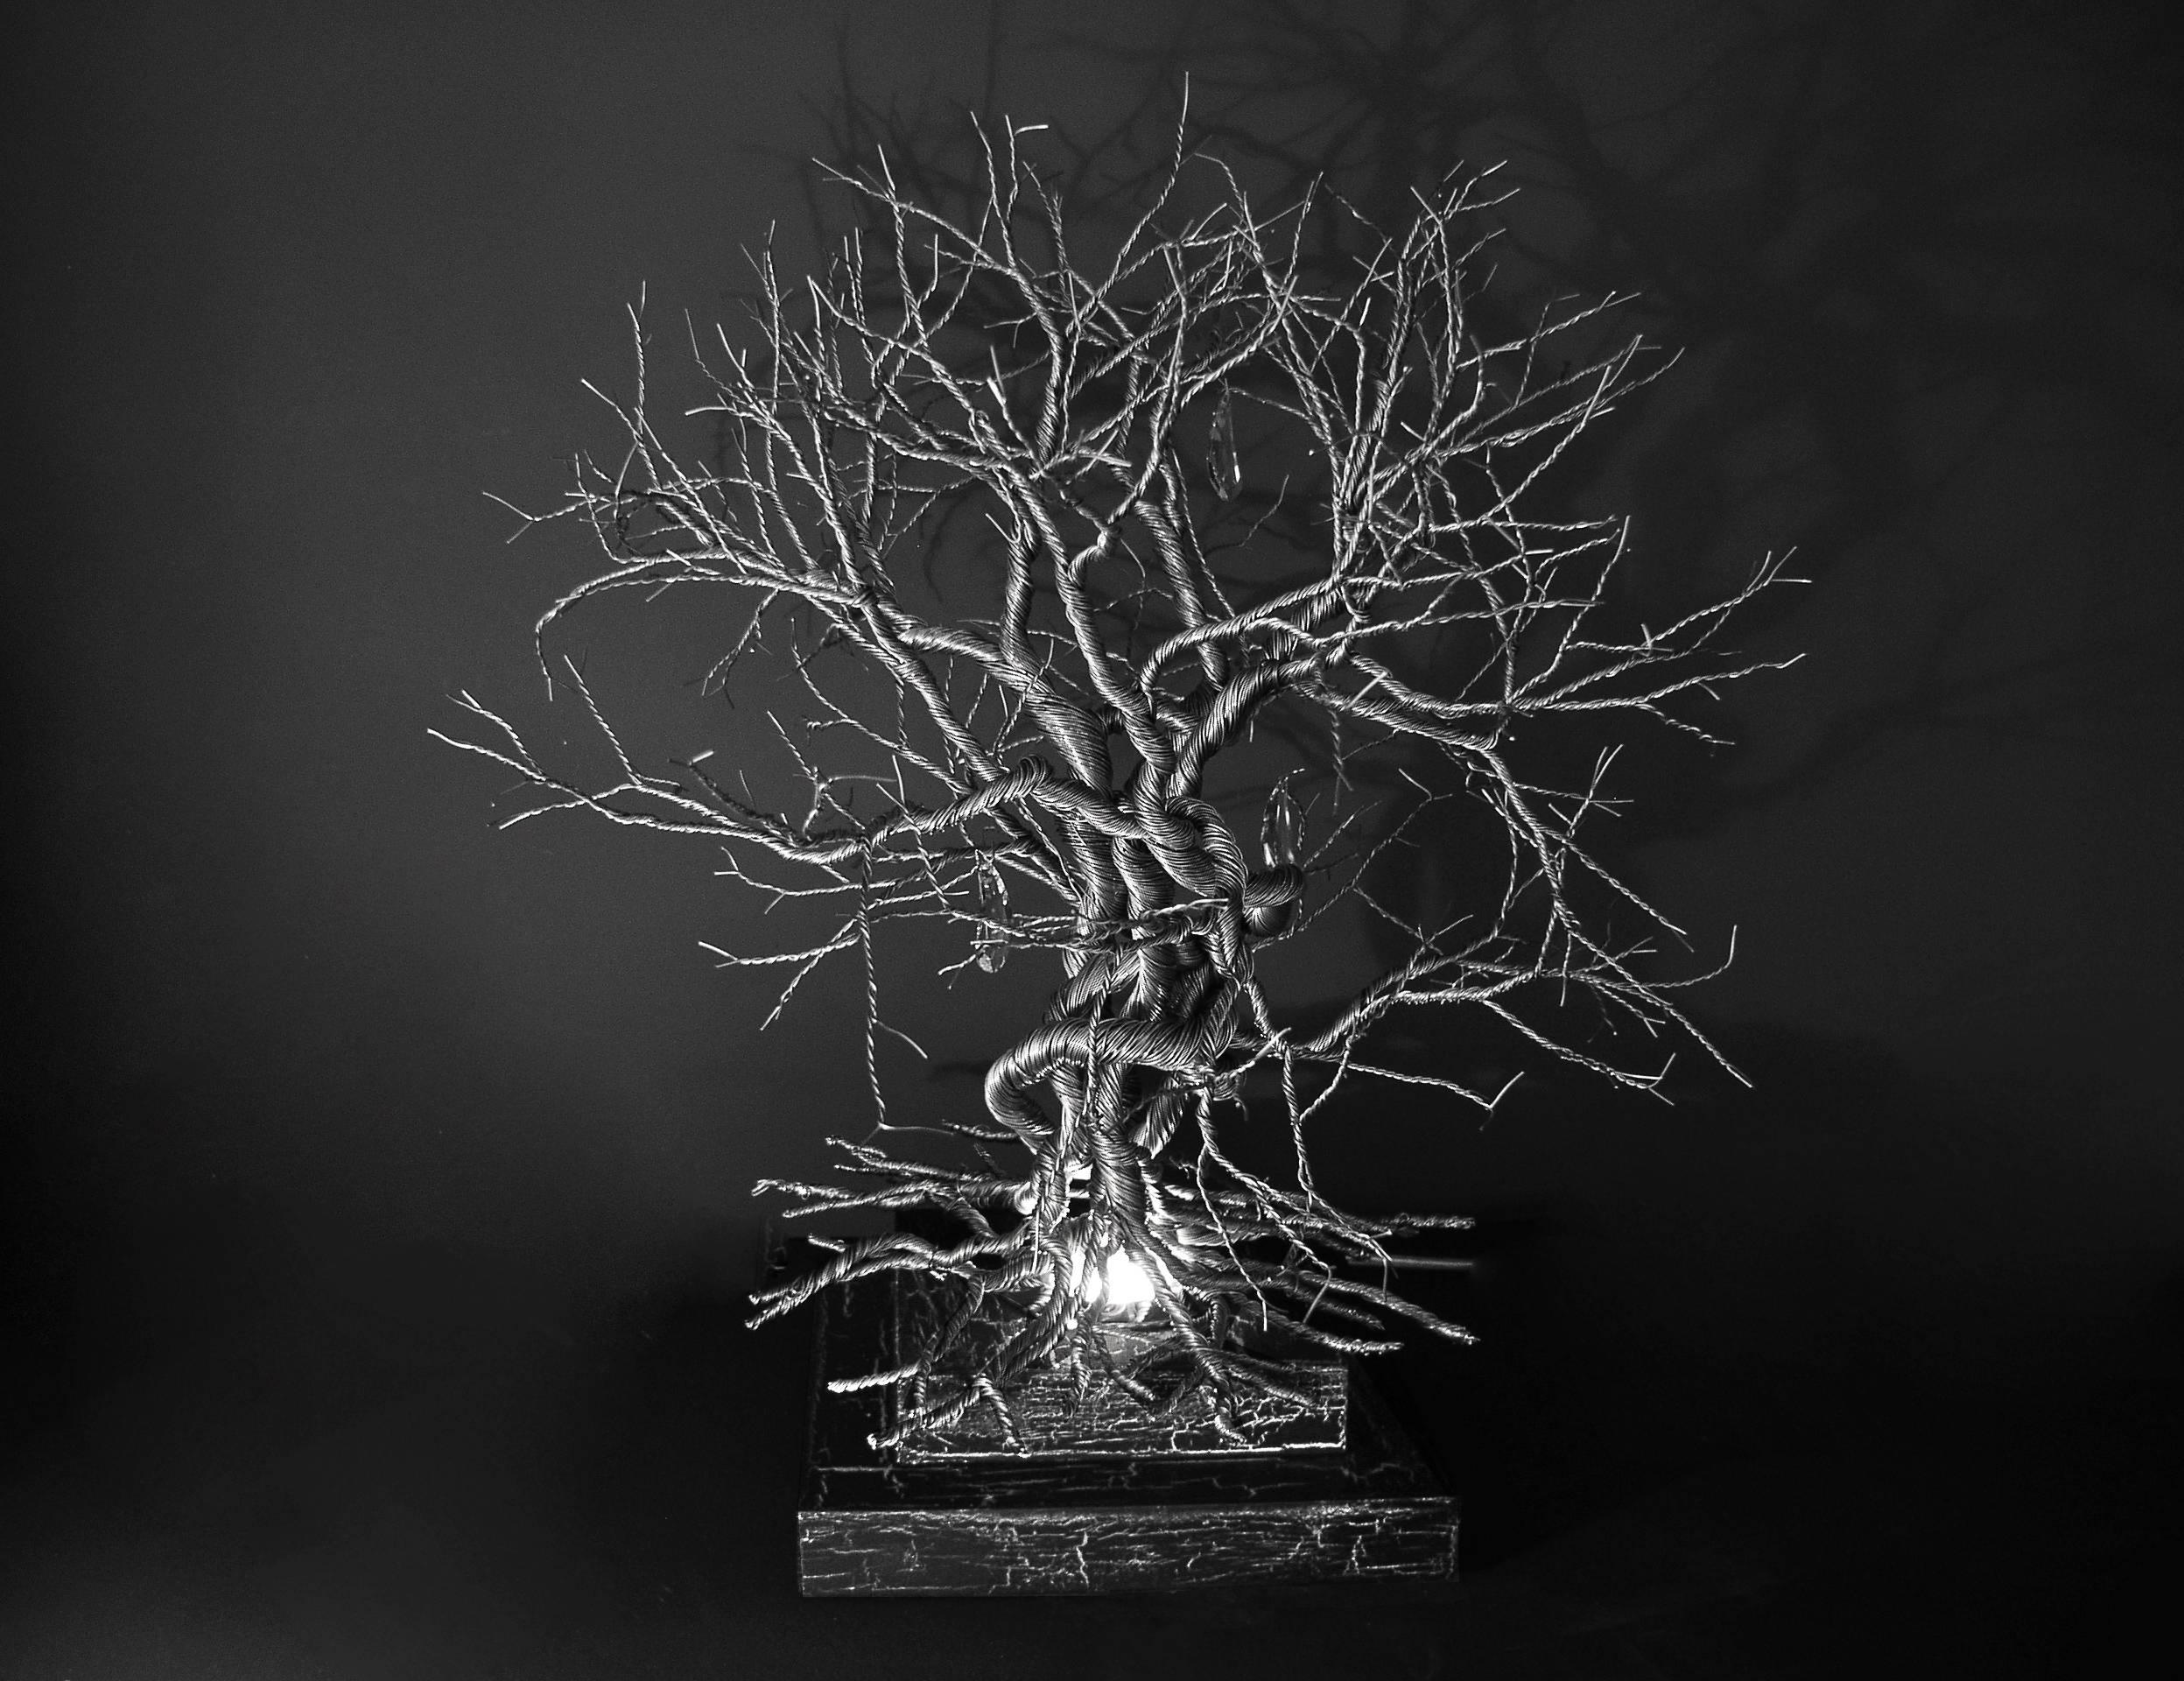 'All things must come to the soul from its roots, from where it is planted.'

Table Light in pewter wires silver colored.
Base 20 cm x 10 cm height in black silvered patina.
Actual tree 35 cm height.
Proposed wire colors: Gold, silver, copper,